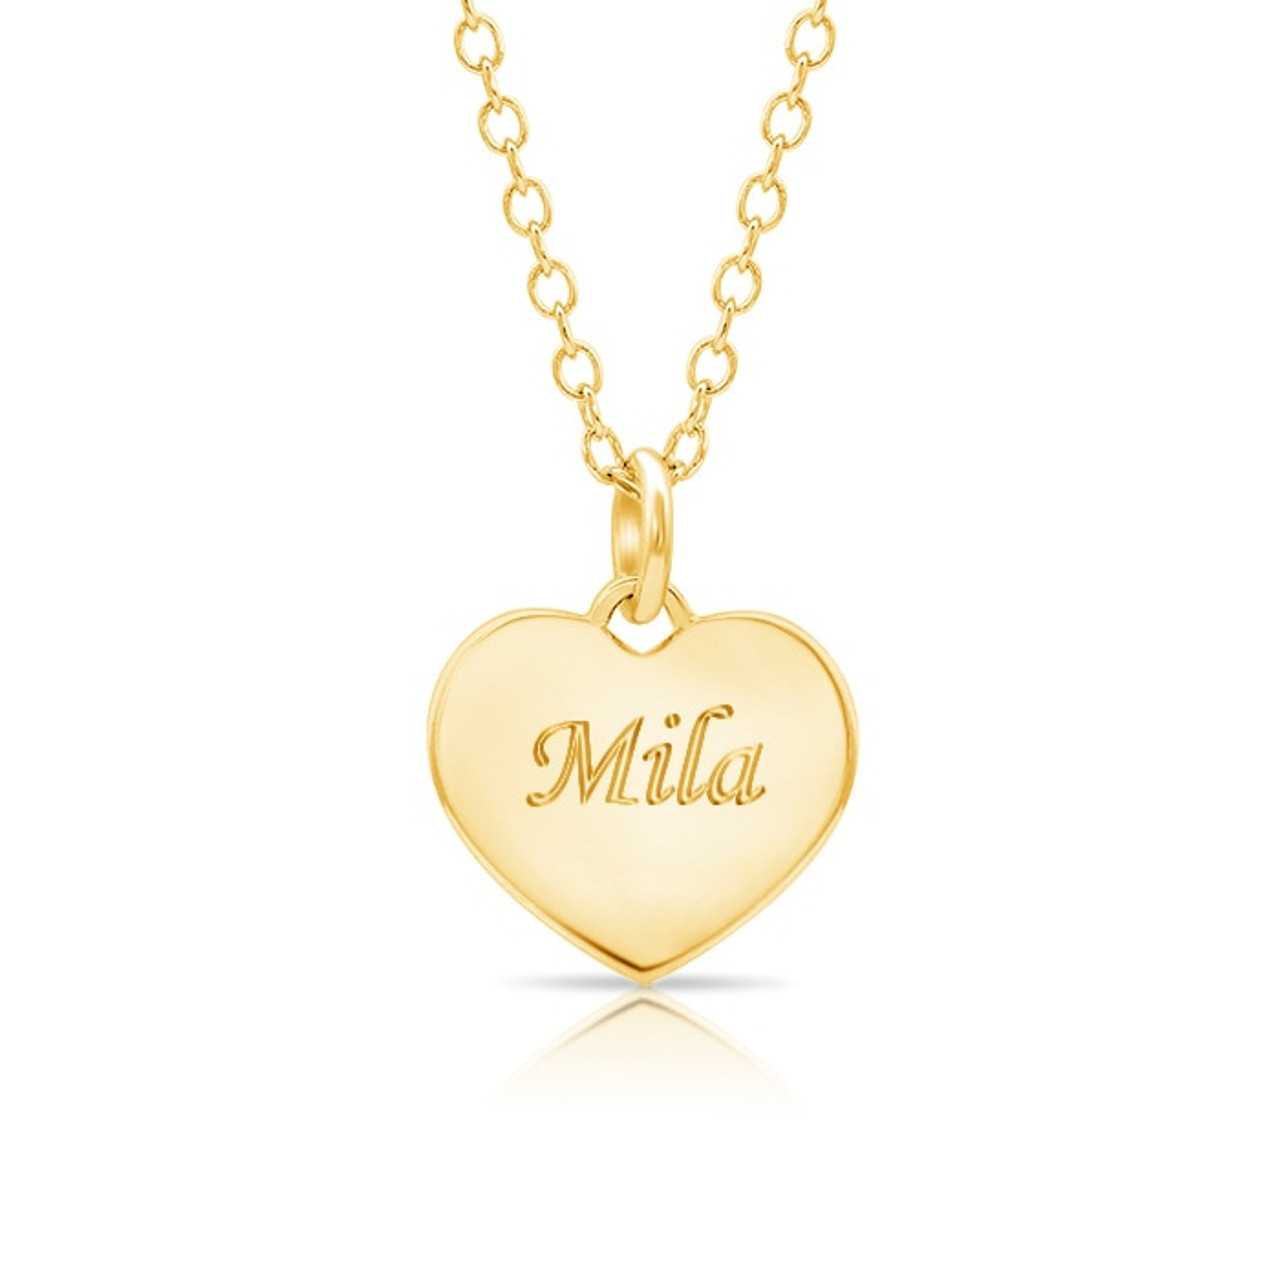 Planet Jill Custom Initial Charm Pendant Necklace, Small Engravable Heart Charm, 14K Gold Photo Gift Chain Jewelry